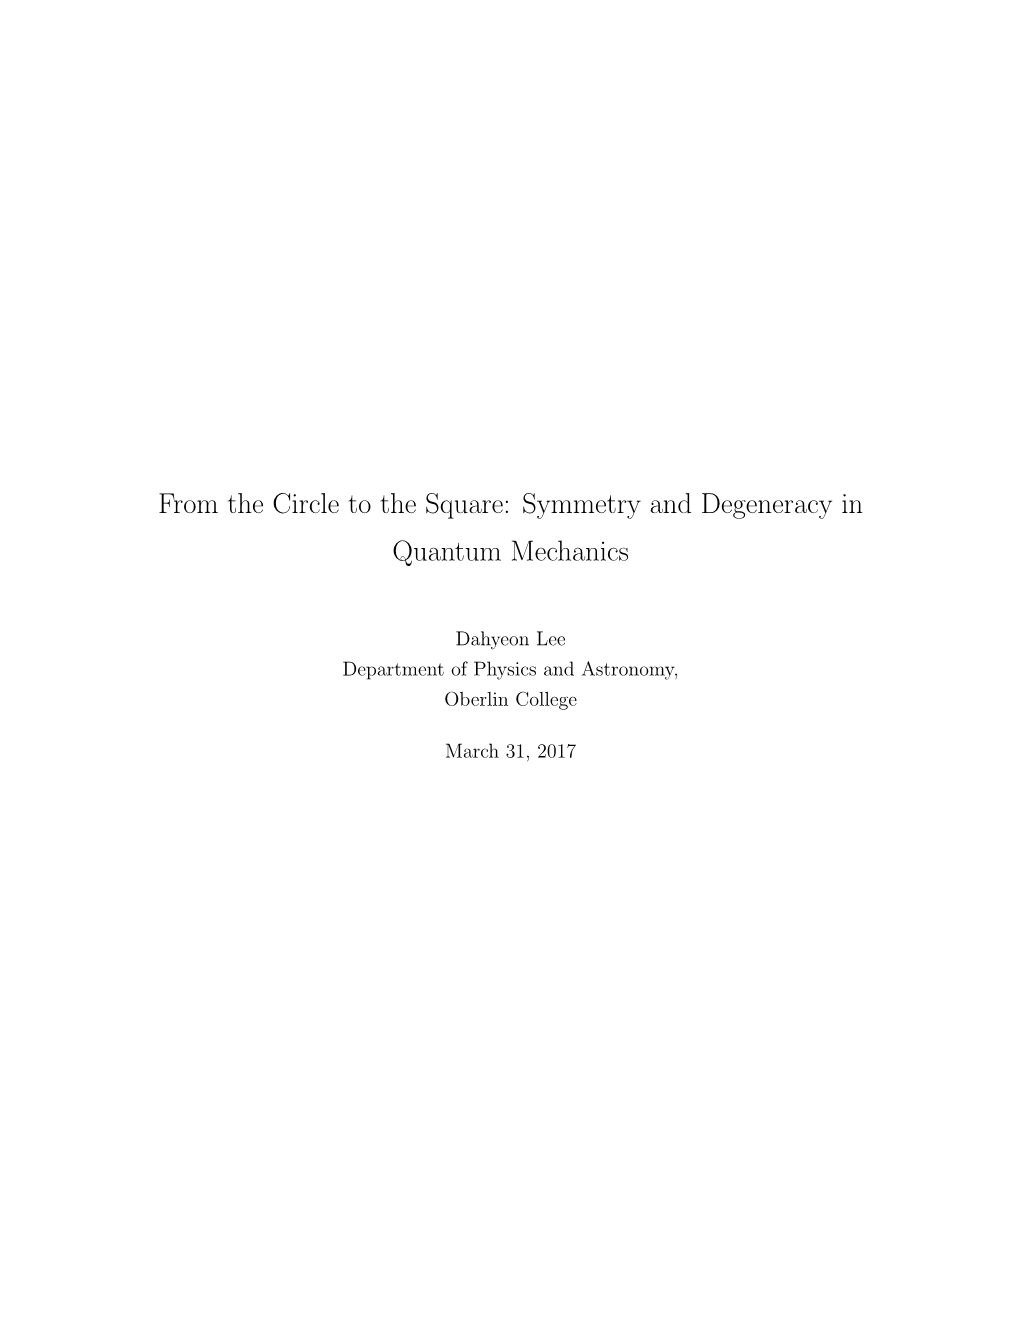 From the Circle to the Square: Symmetry and Degeneracy in Quantum Mechanics